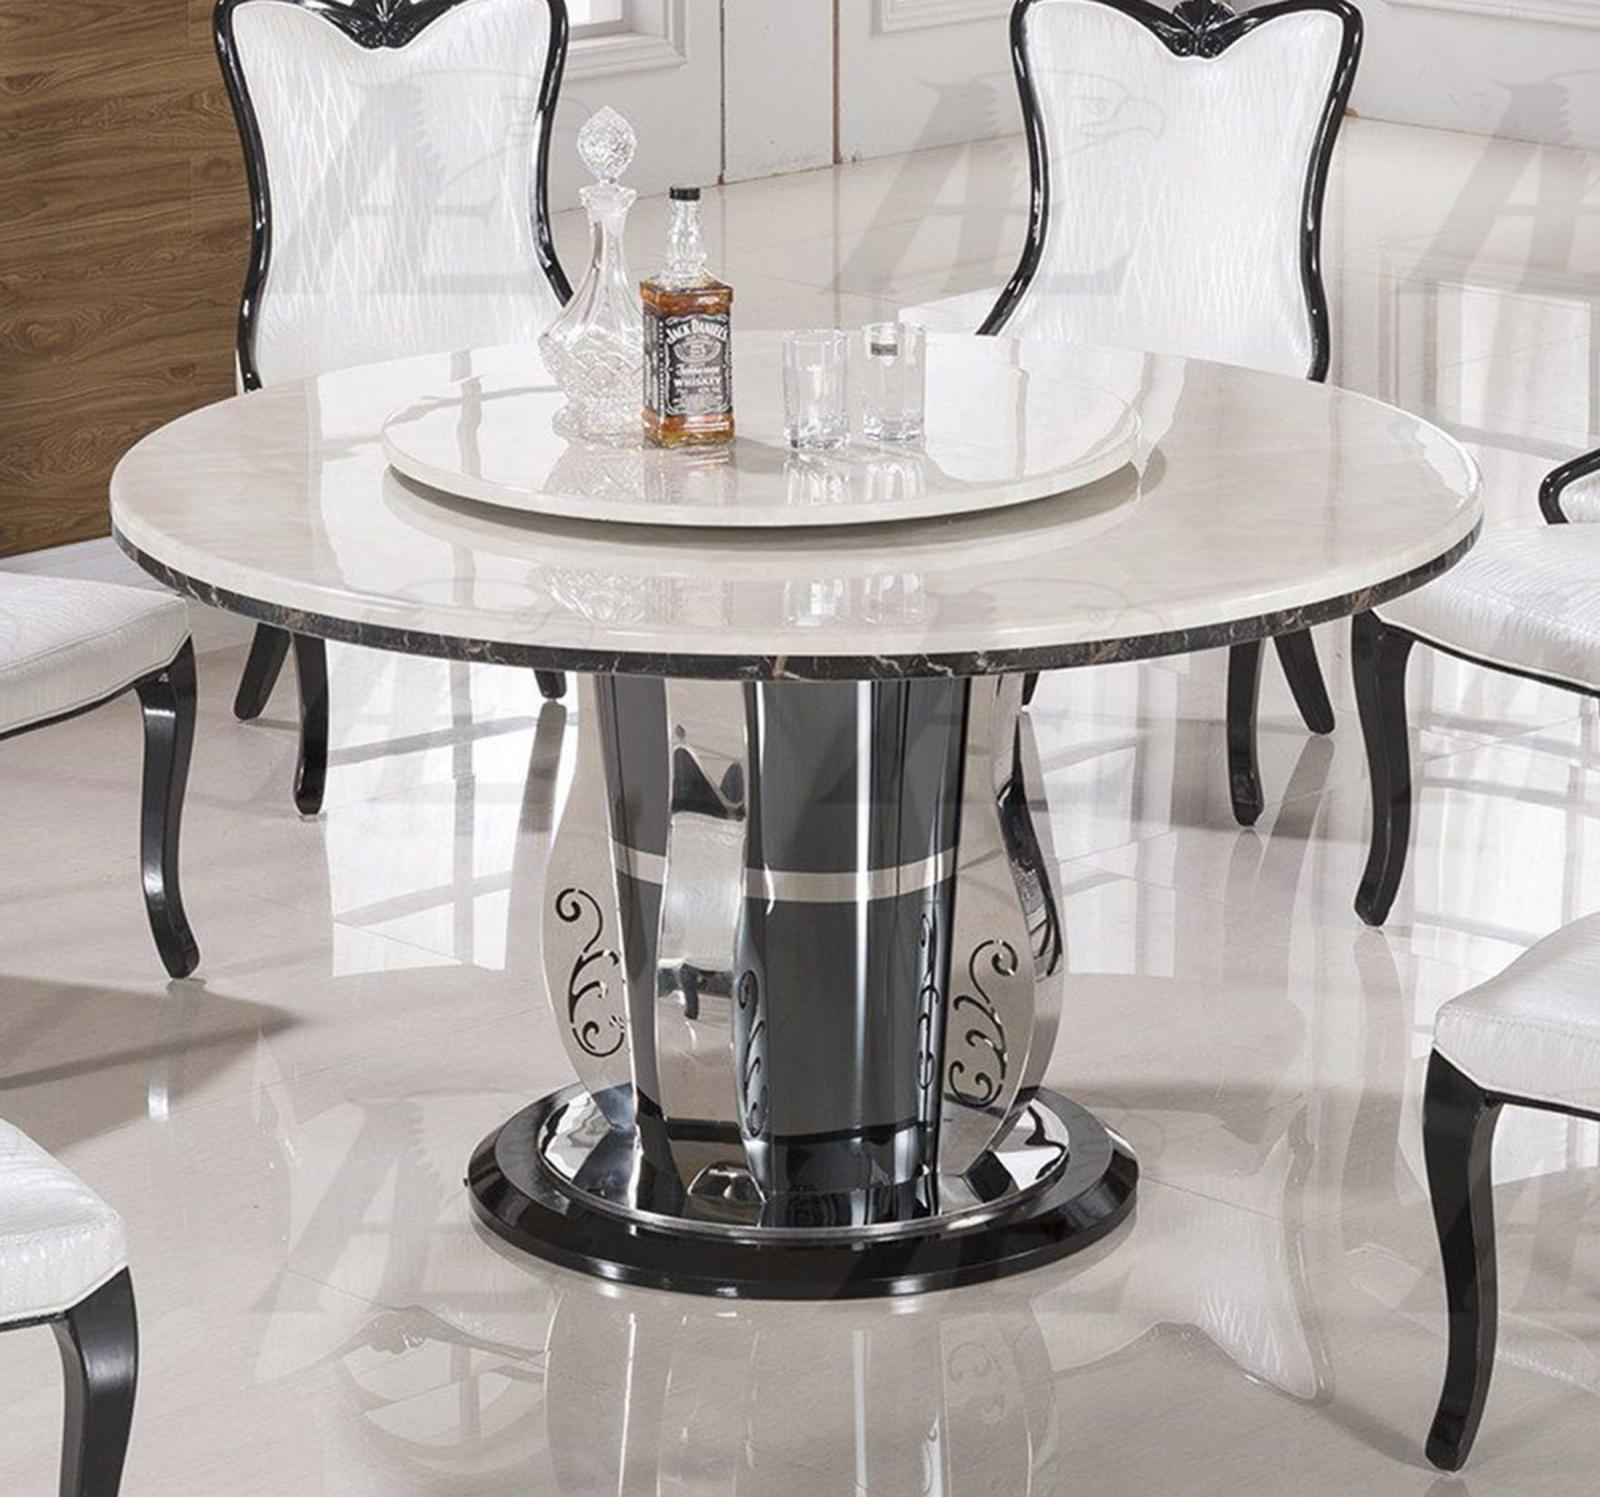 

    
Faux Marble Top Round Table &  White PU Chairs Set 7Pcs American Eagle DT-H62
